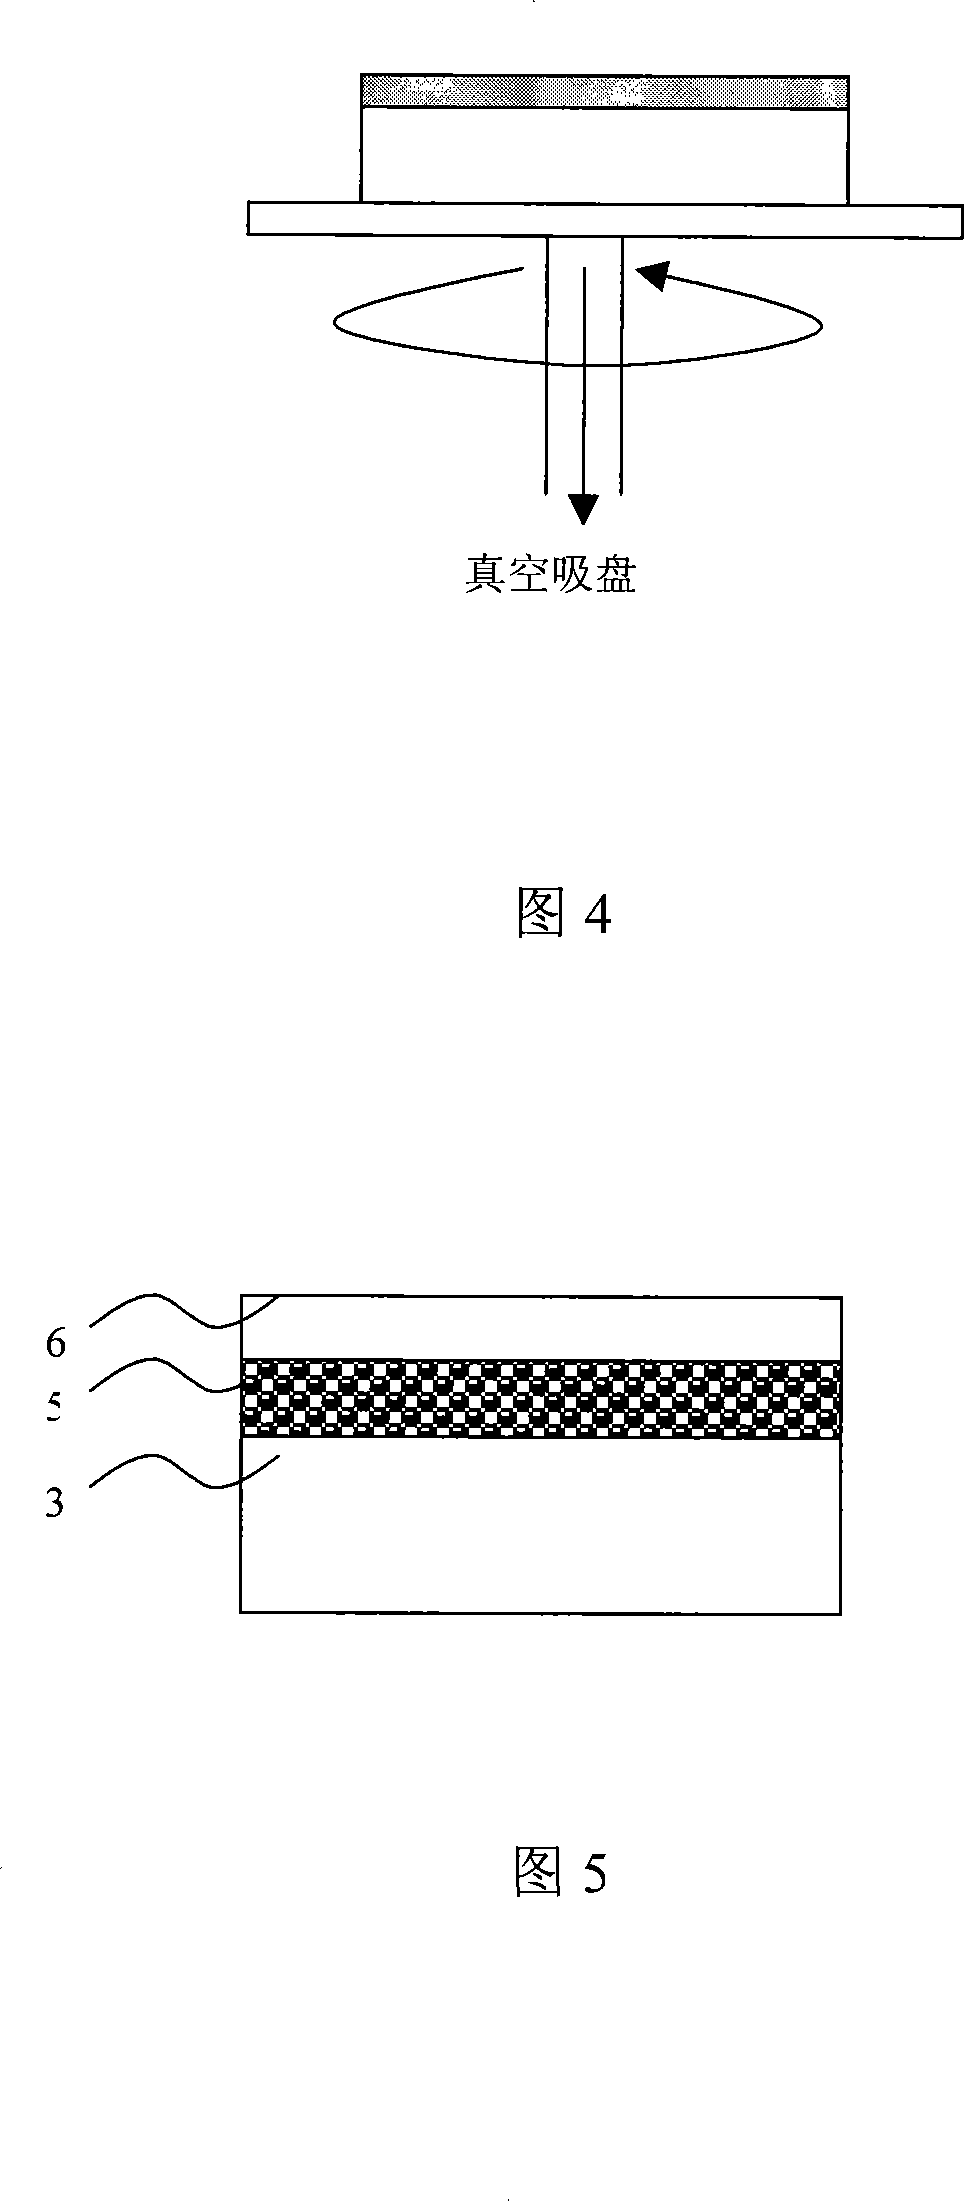 Insulating layer upper semiconductor structure with low dielectric constant as insulation buried layer and its method